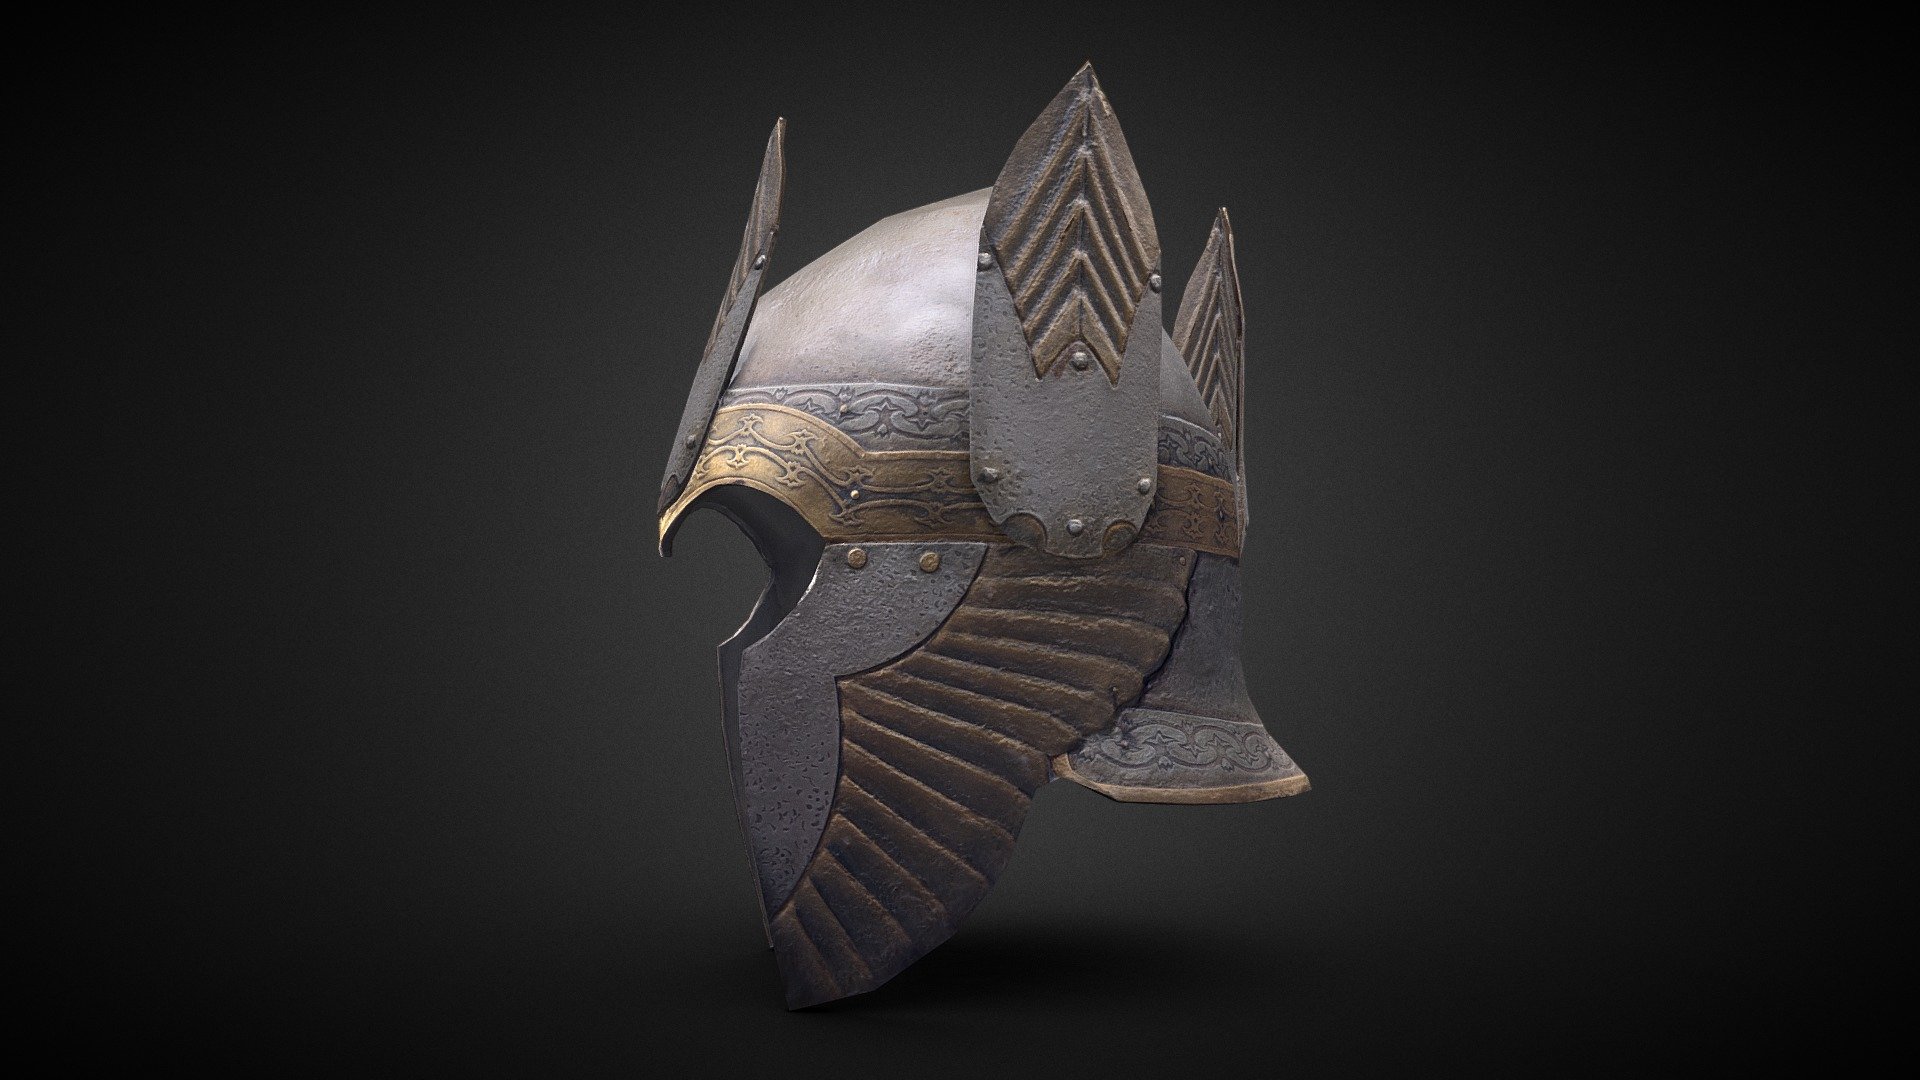 Photo scan - low poly - WIP

playing around with photo scanning

Software used:
Reality Capture
Blender
Substance Painter - Isildur's helmet - Lord of the Rings - WIP - 3D model by robyp (@robyp955) 3d model